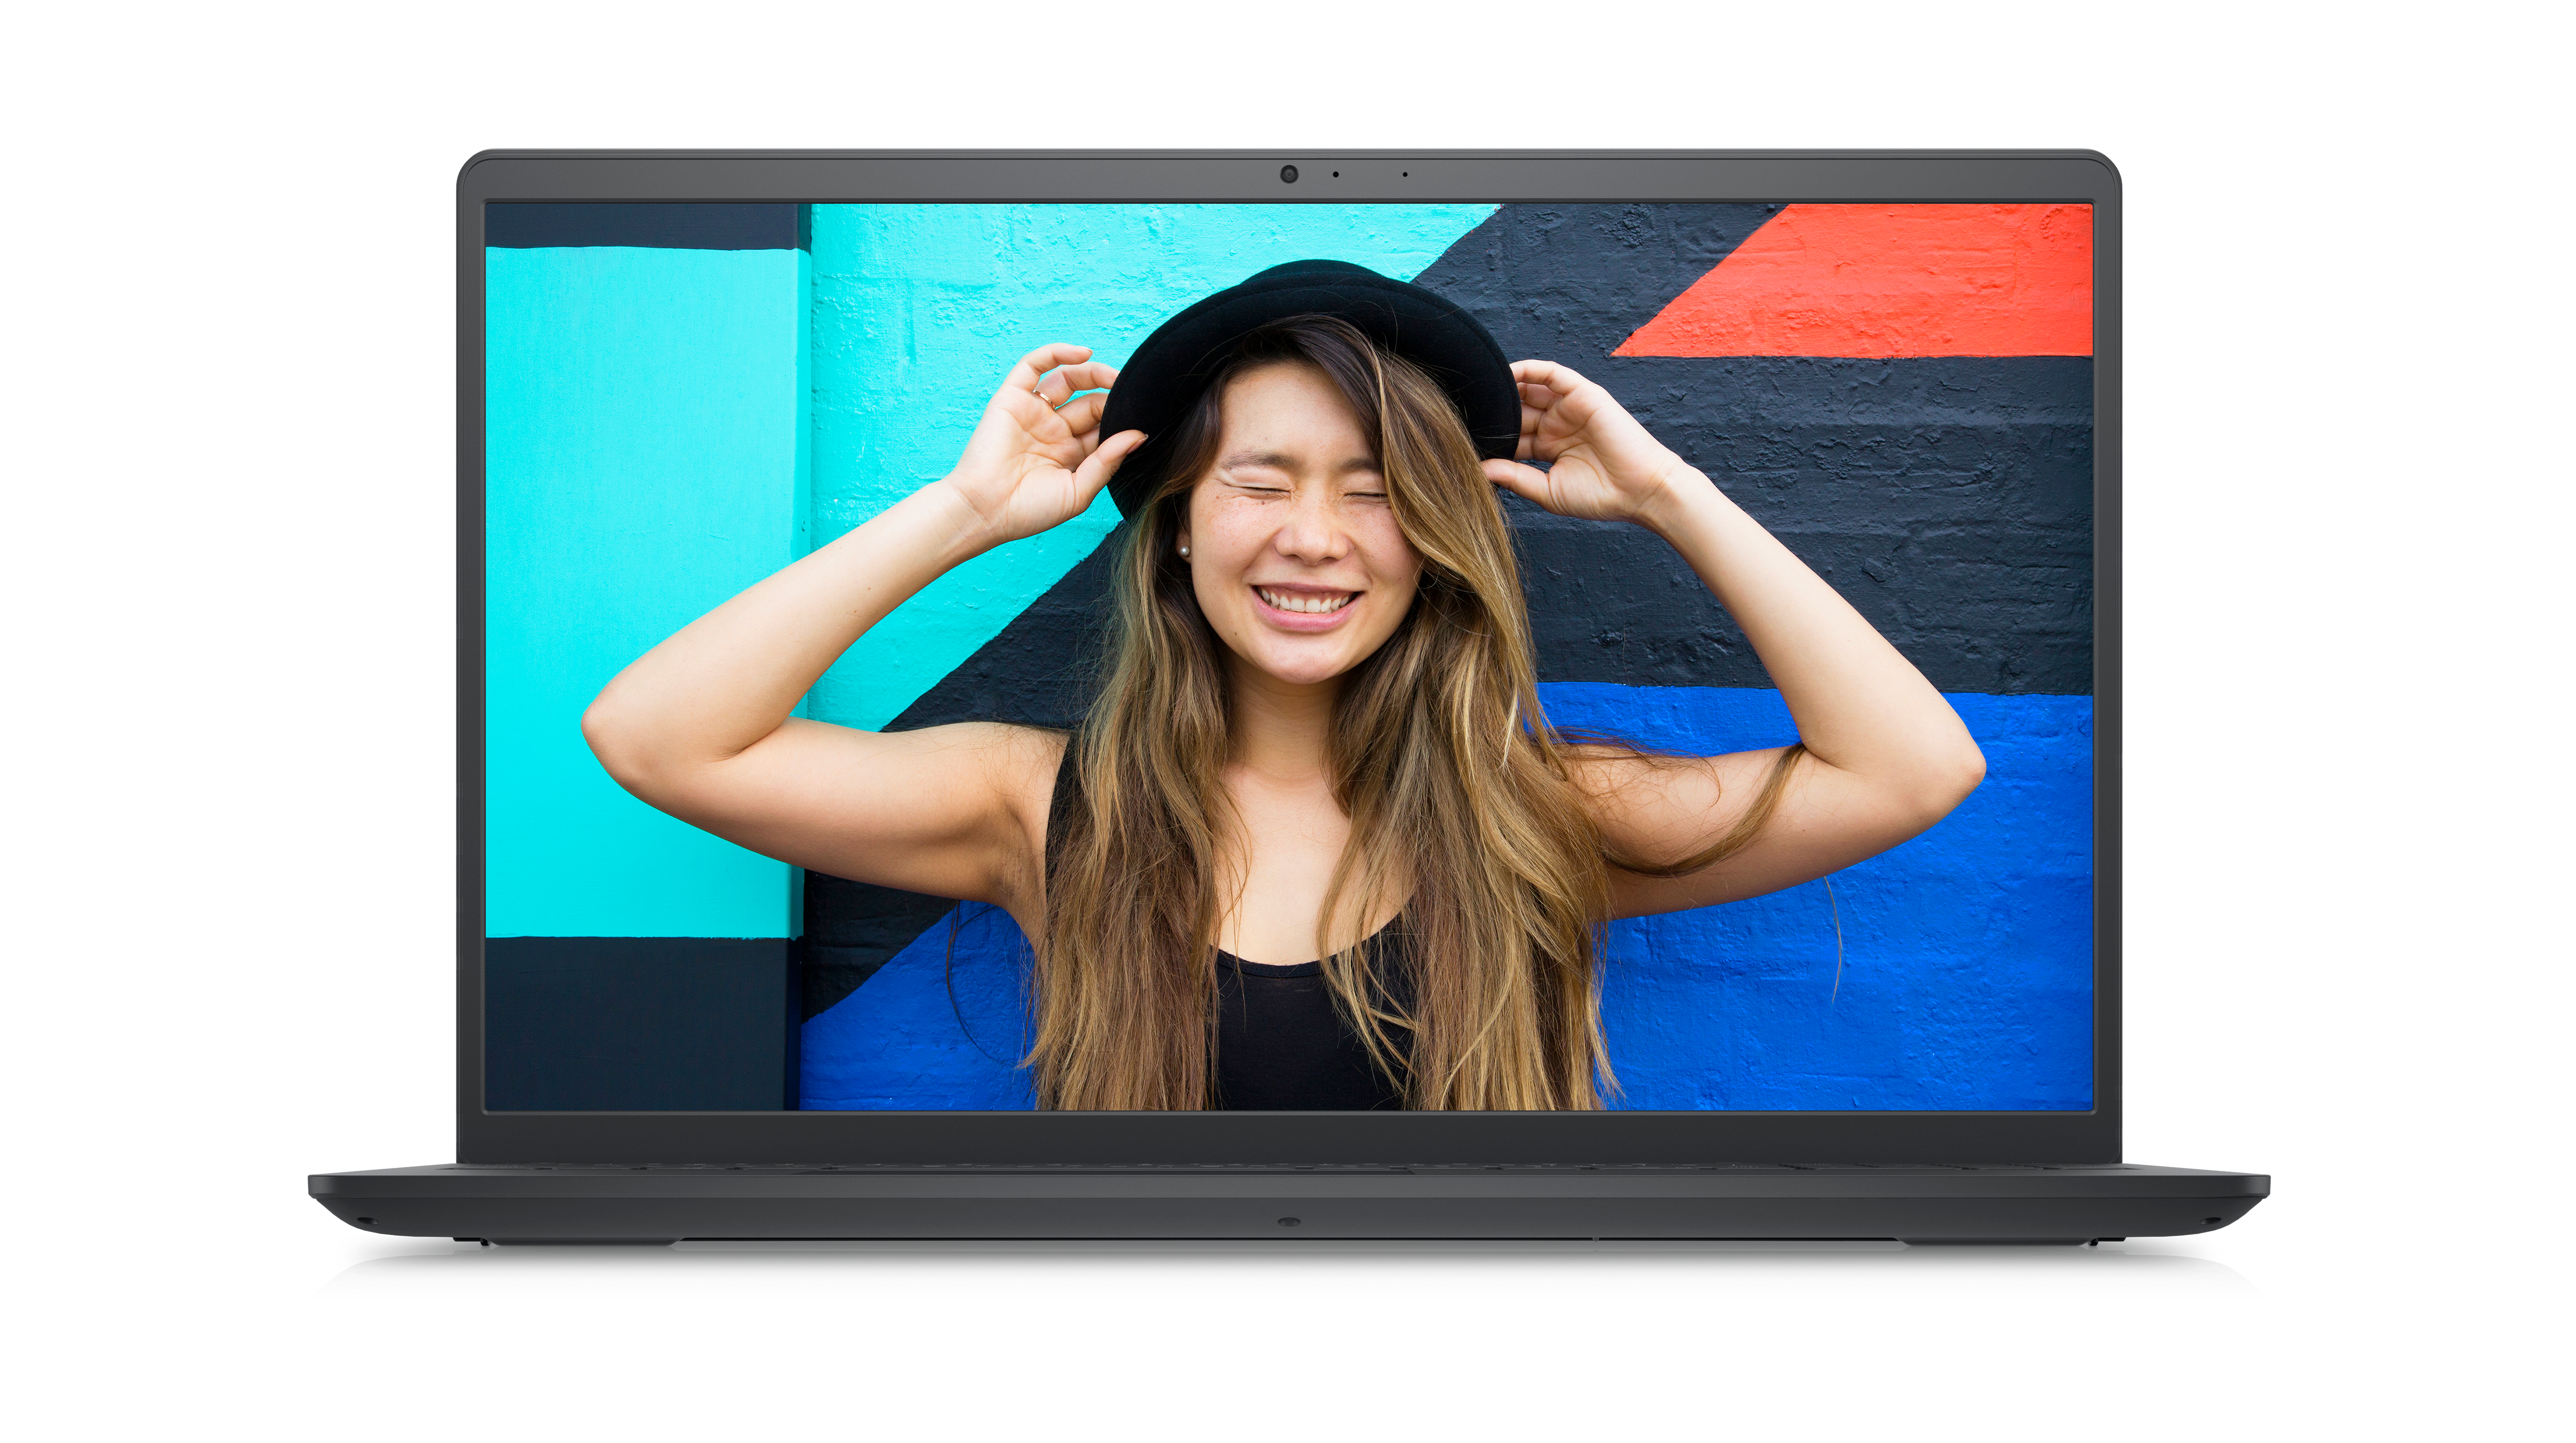 Picture of a Dell Inspiron 15 3520 Laptop with a smiley girl wearing a black hat and t-shirt on the screen.